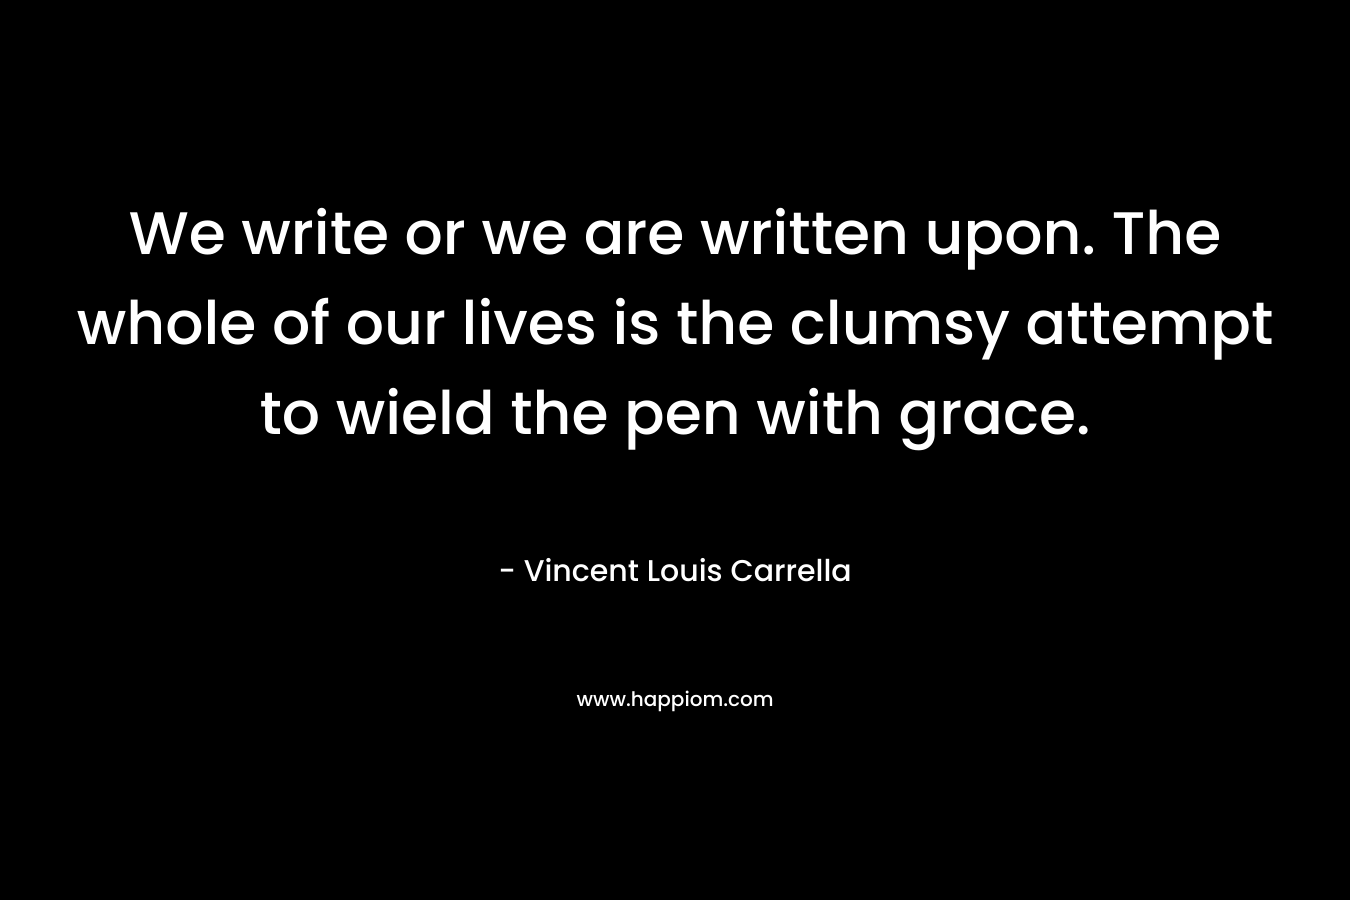 We write or we are written upon. The whole of our lives is the clumsy attempt to wield the pen with grace.